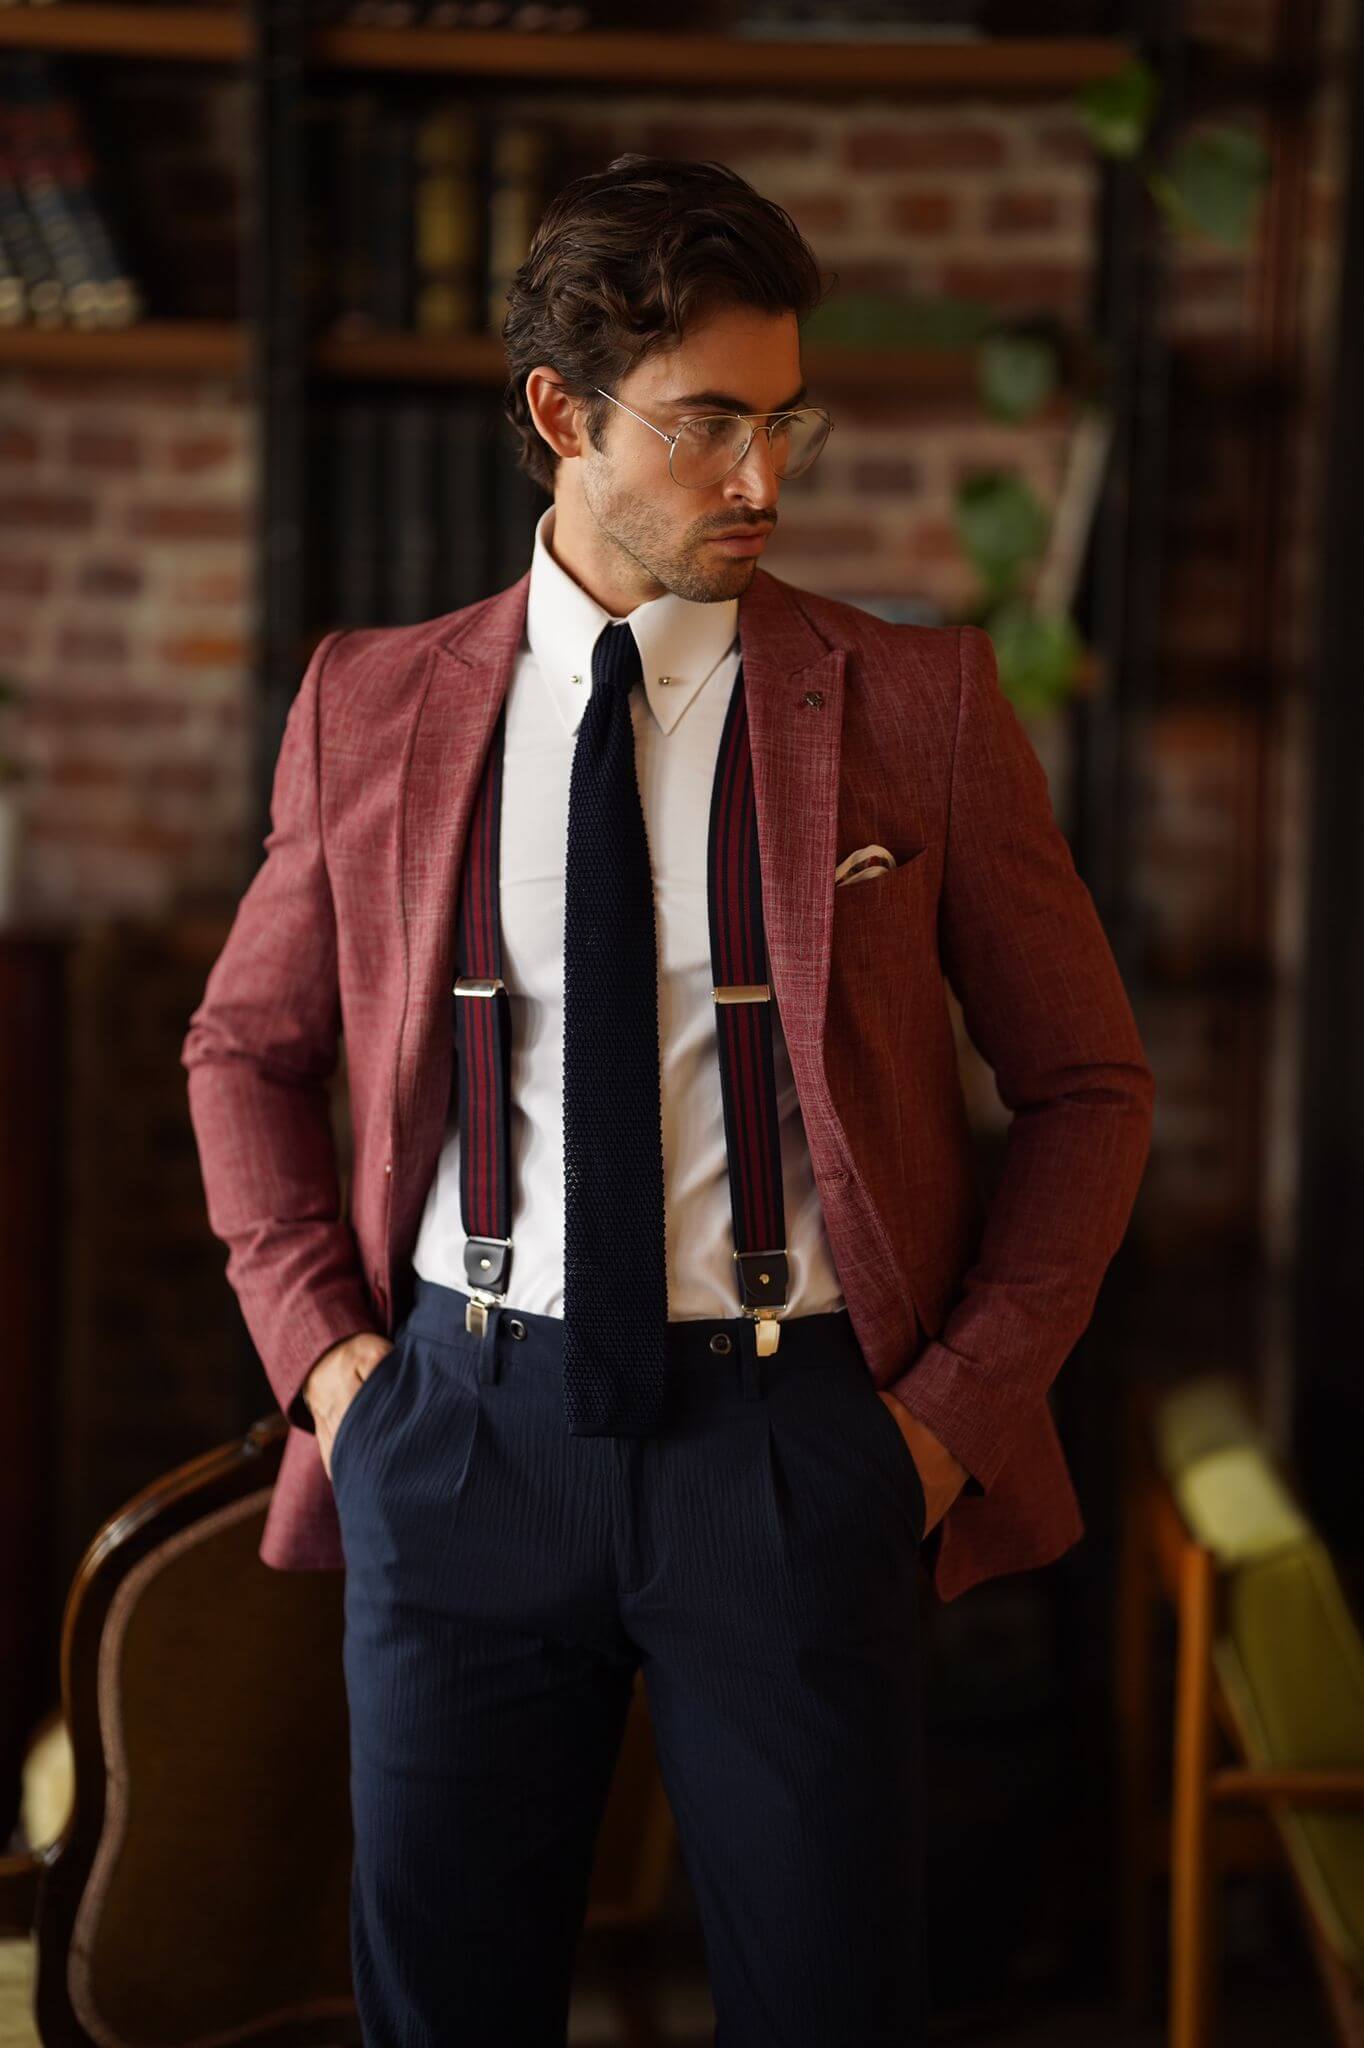 A Slim-Fit Self patterned Cotton Claret Red Blazer on display.